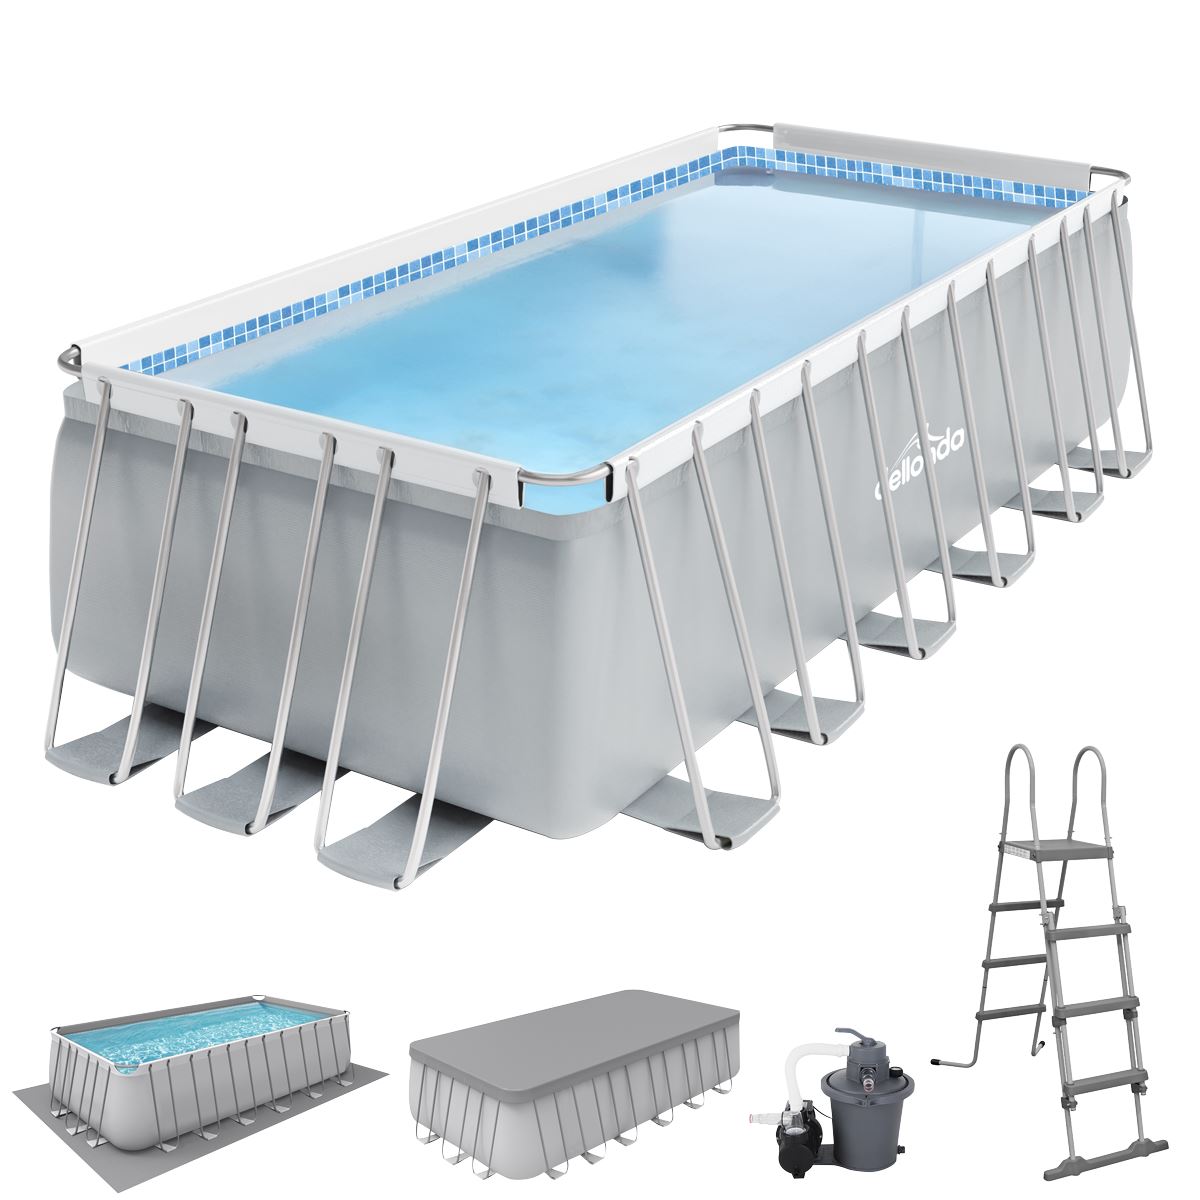 Dellonda 25ft Deluxe Steel Frame Swimming Pool with Step Ladder, Ground Covers and Filter Pump